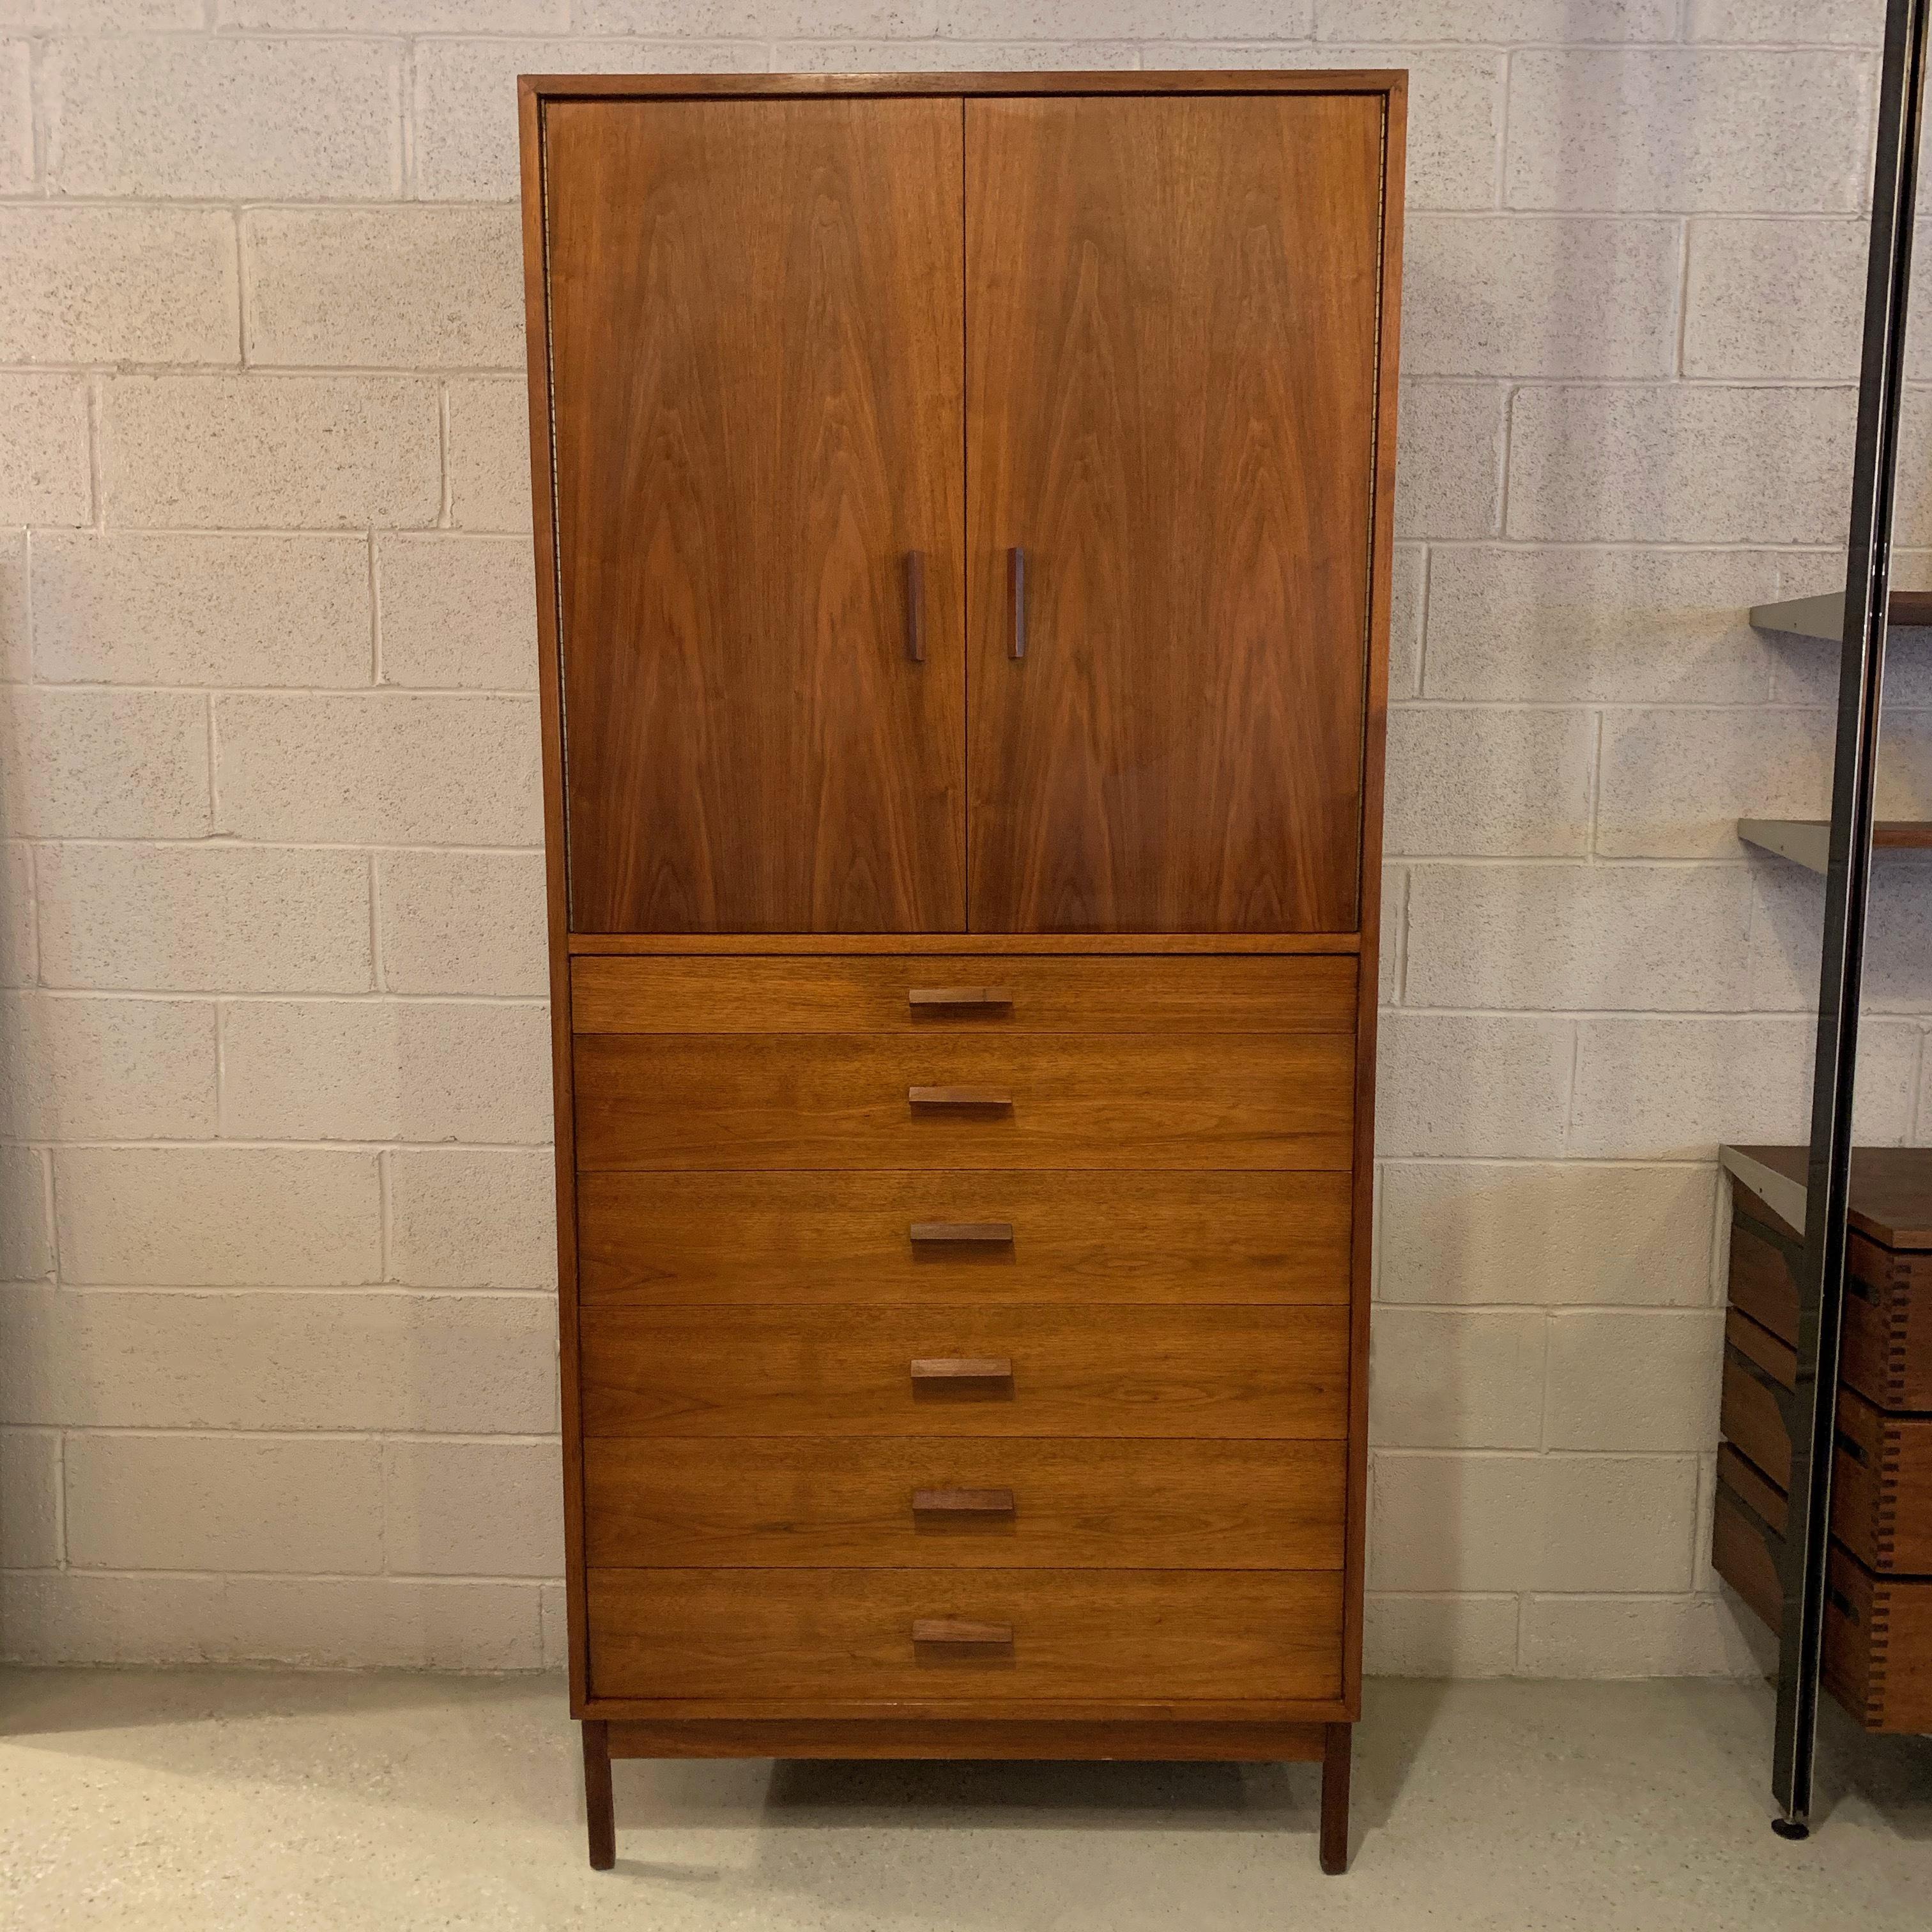 Handsome, Mid-Century Modern, walnut armoire or gentleman's chest features 6 drawers on the bottom half and upper cabinet with two adjustable shelves on each side and pullout / pull-out shelves in the middle.